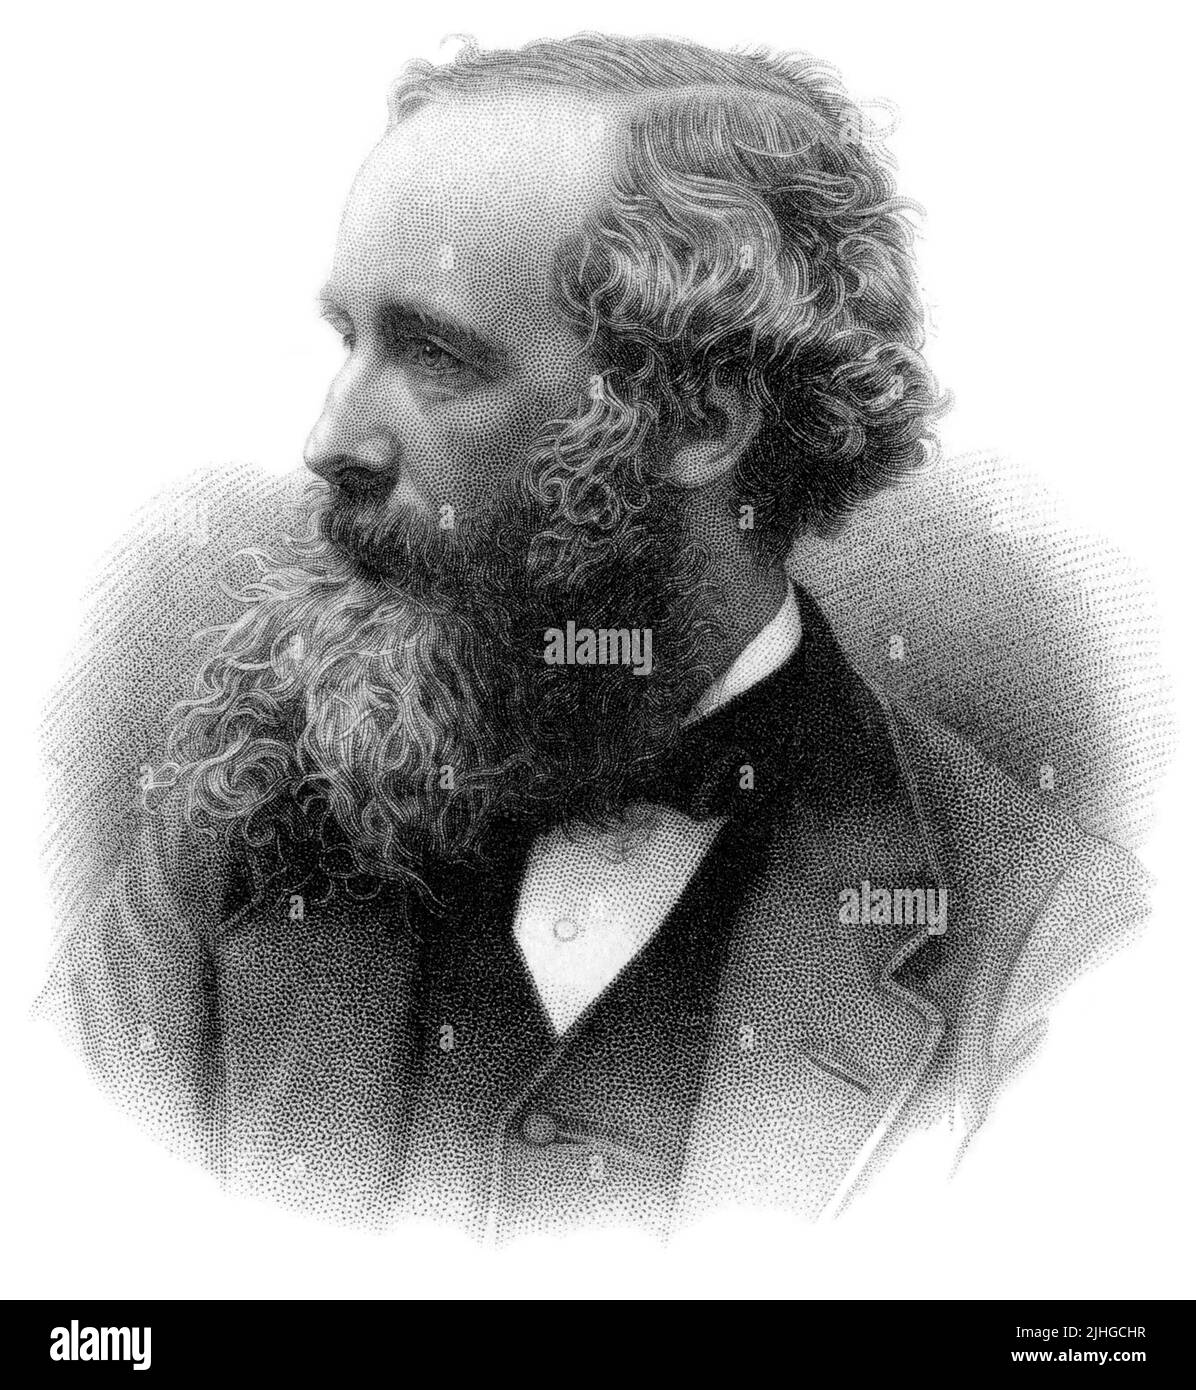 James Clerk Maxwell FRSE FRS (1831–1879) was a Scottish mathematician and theoretical physicist responsible for the classical theory of electromagnetic radiation, which was the first theory to describe electricity, magnetism and light as different manifestations of the same phenomenon. Maxwell is regarded by some as the Father of Modern Physics. Stock Photo